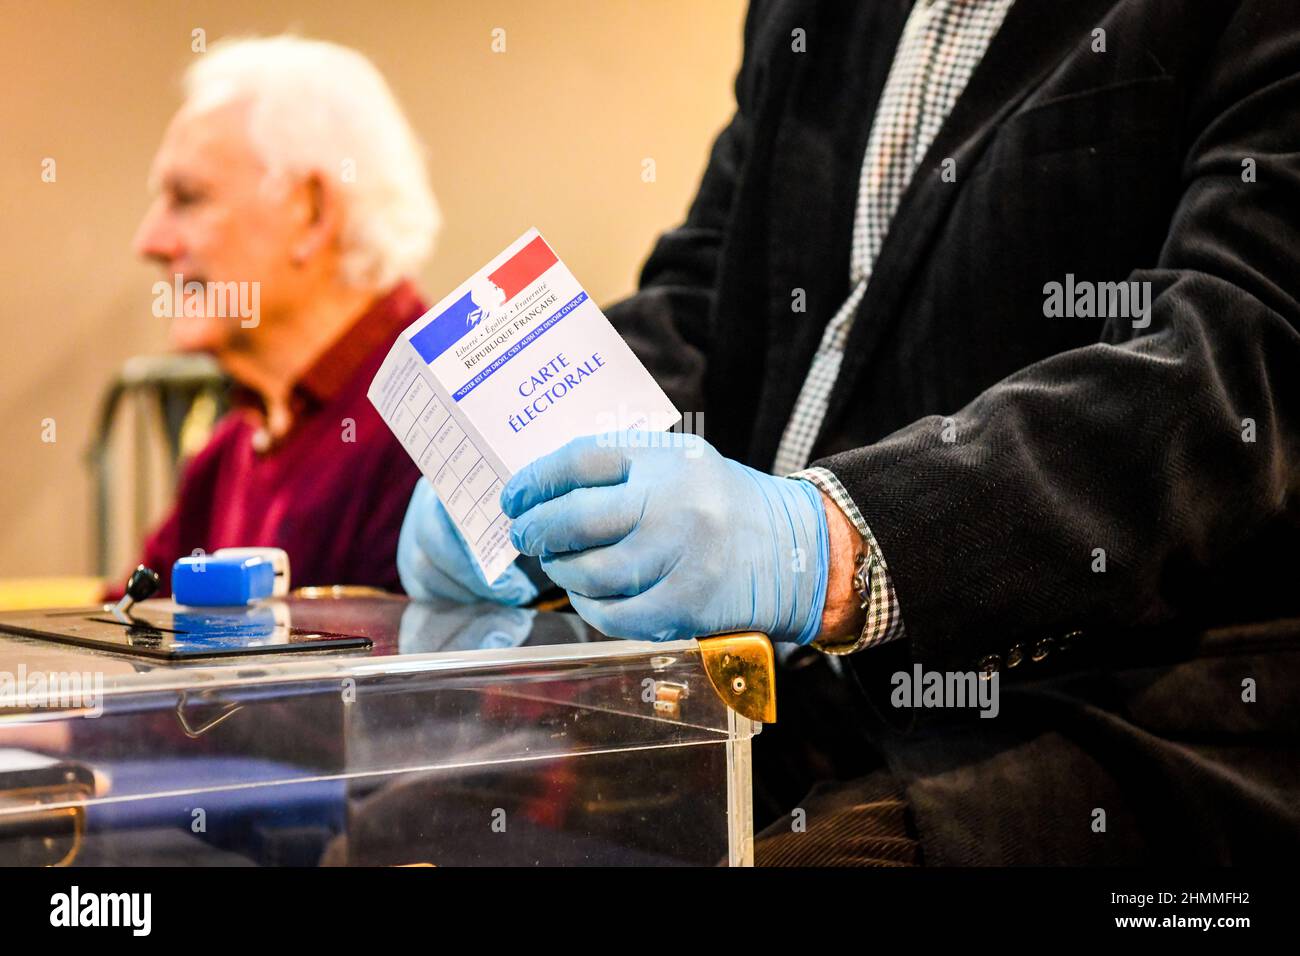 Local election: polling station in Rouen (northern France) on March 15, 2020. Assessor with disposable gloves holding a voter registration card Stock Photo